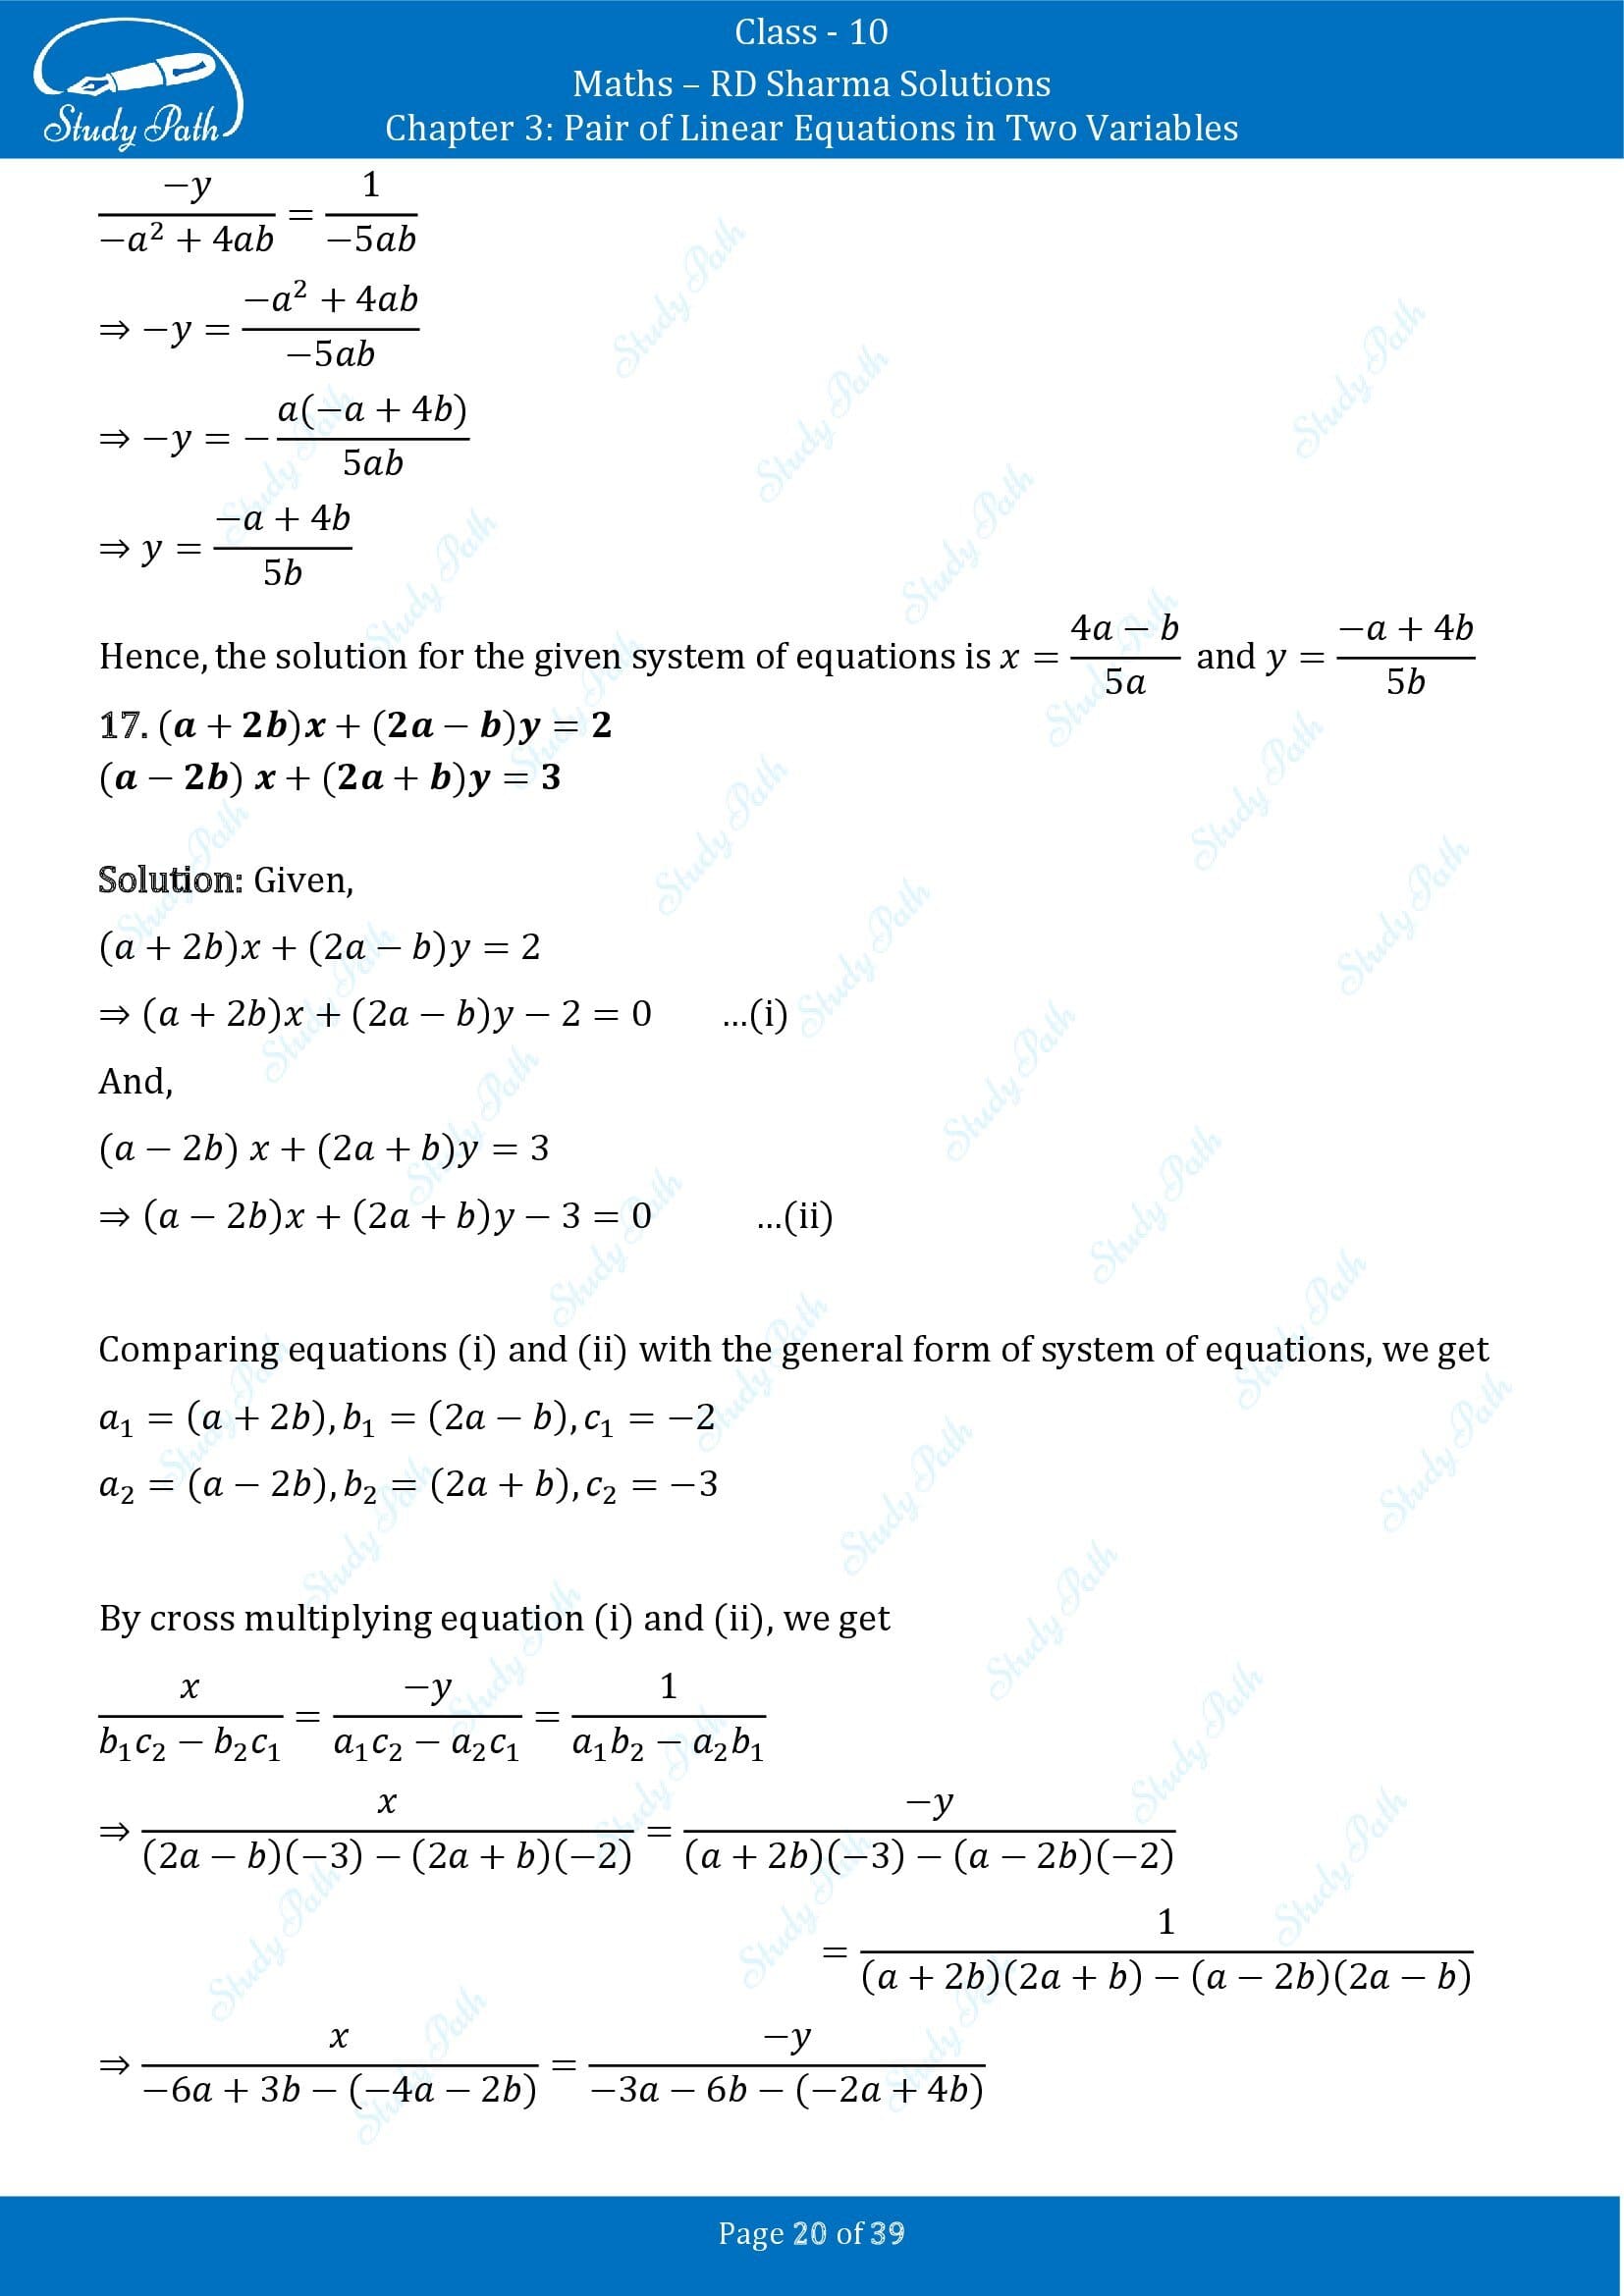 RD Sharma Solutions Class 10 Chapter 3 Pair of Linear Equations in Two Variables Exercise 3.4 00020